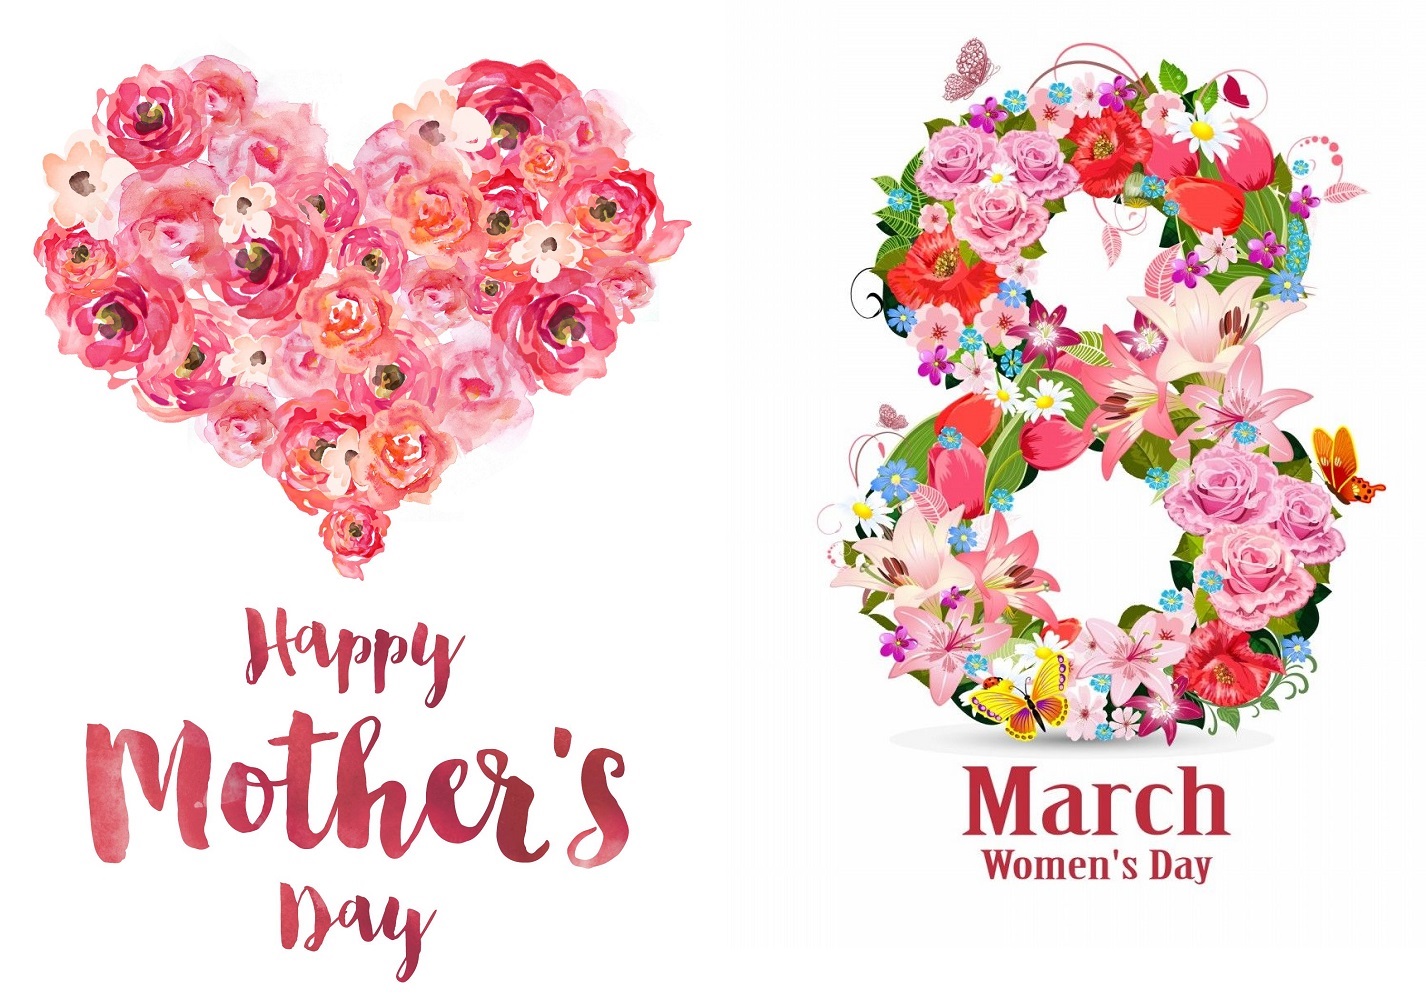 March 3 - Mother's Day and March 8 - International Women's Day - are holidays!